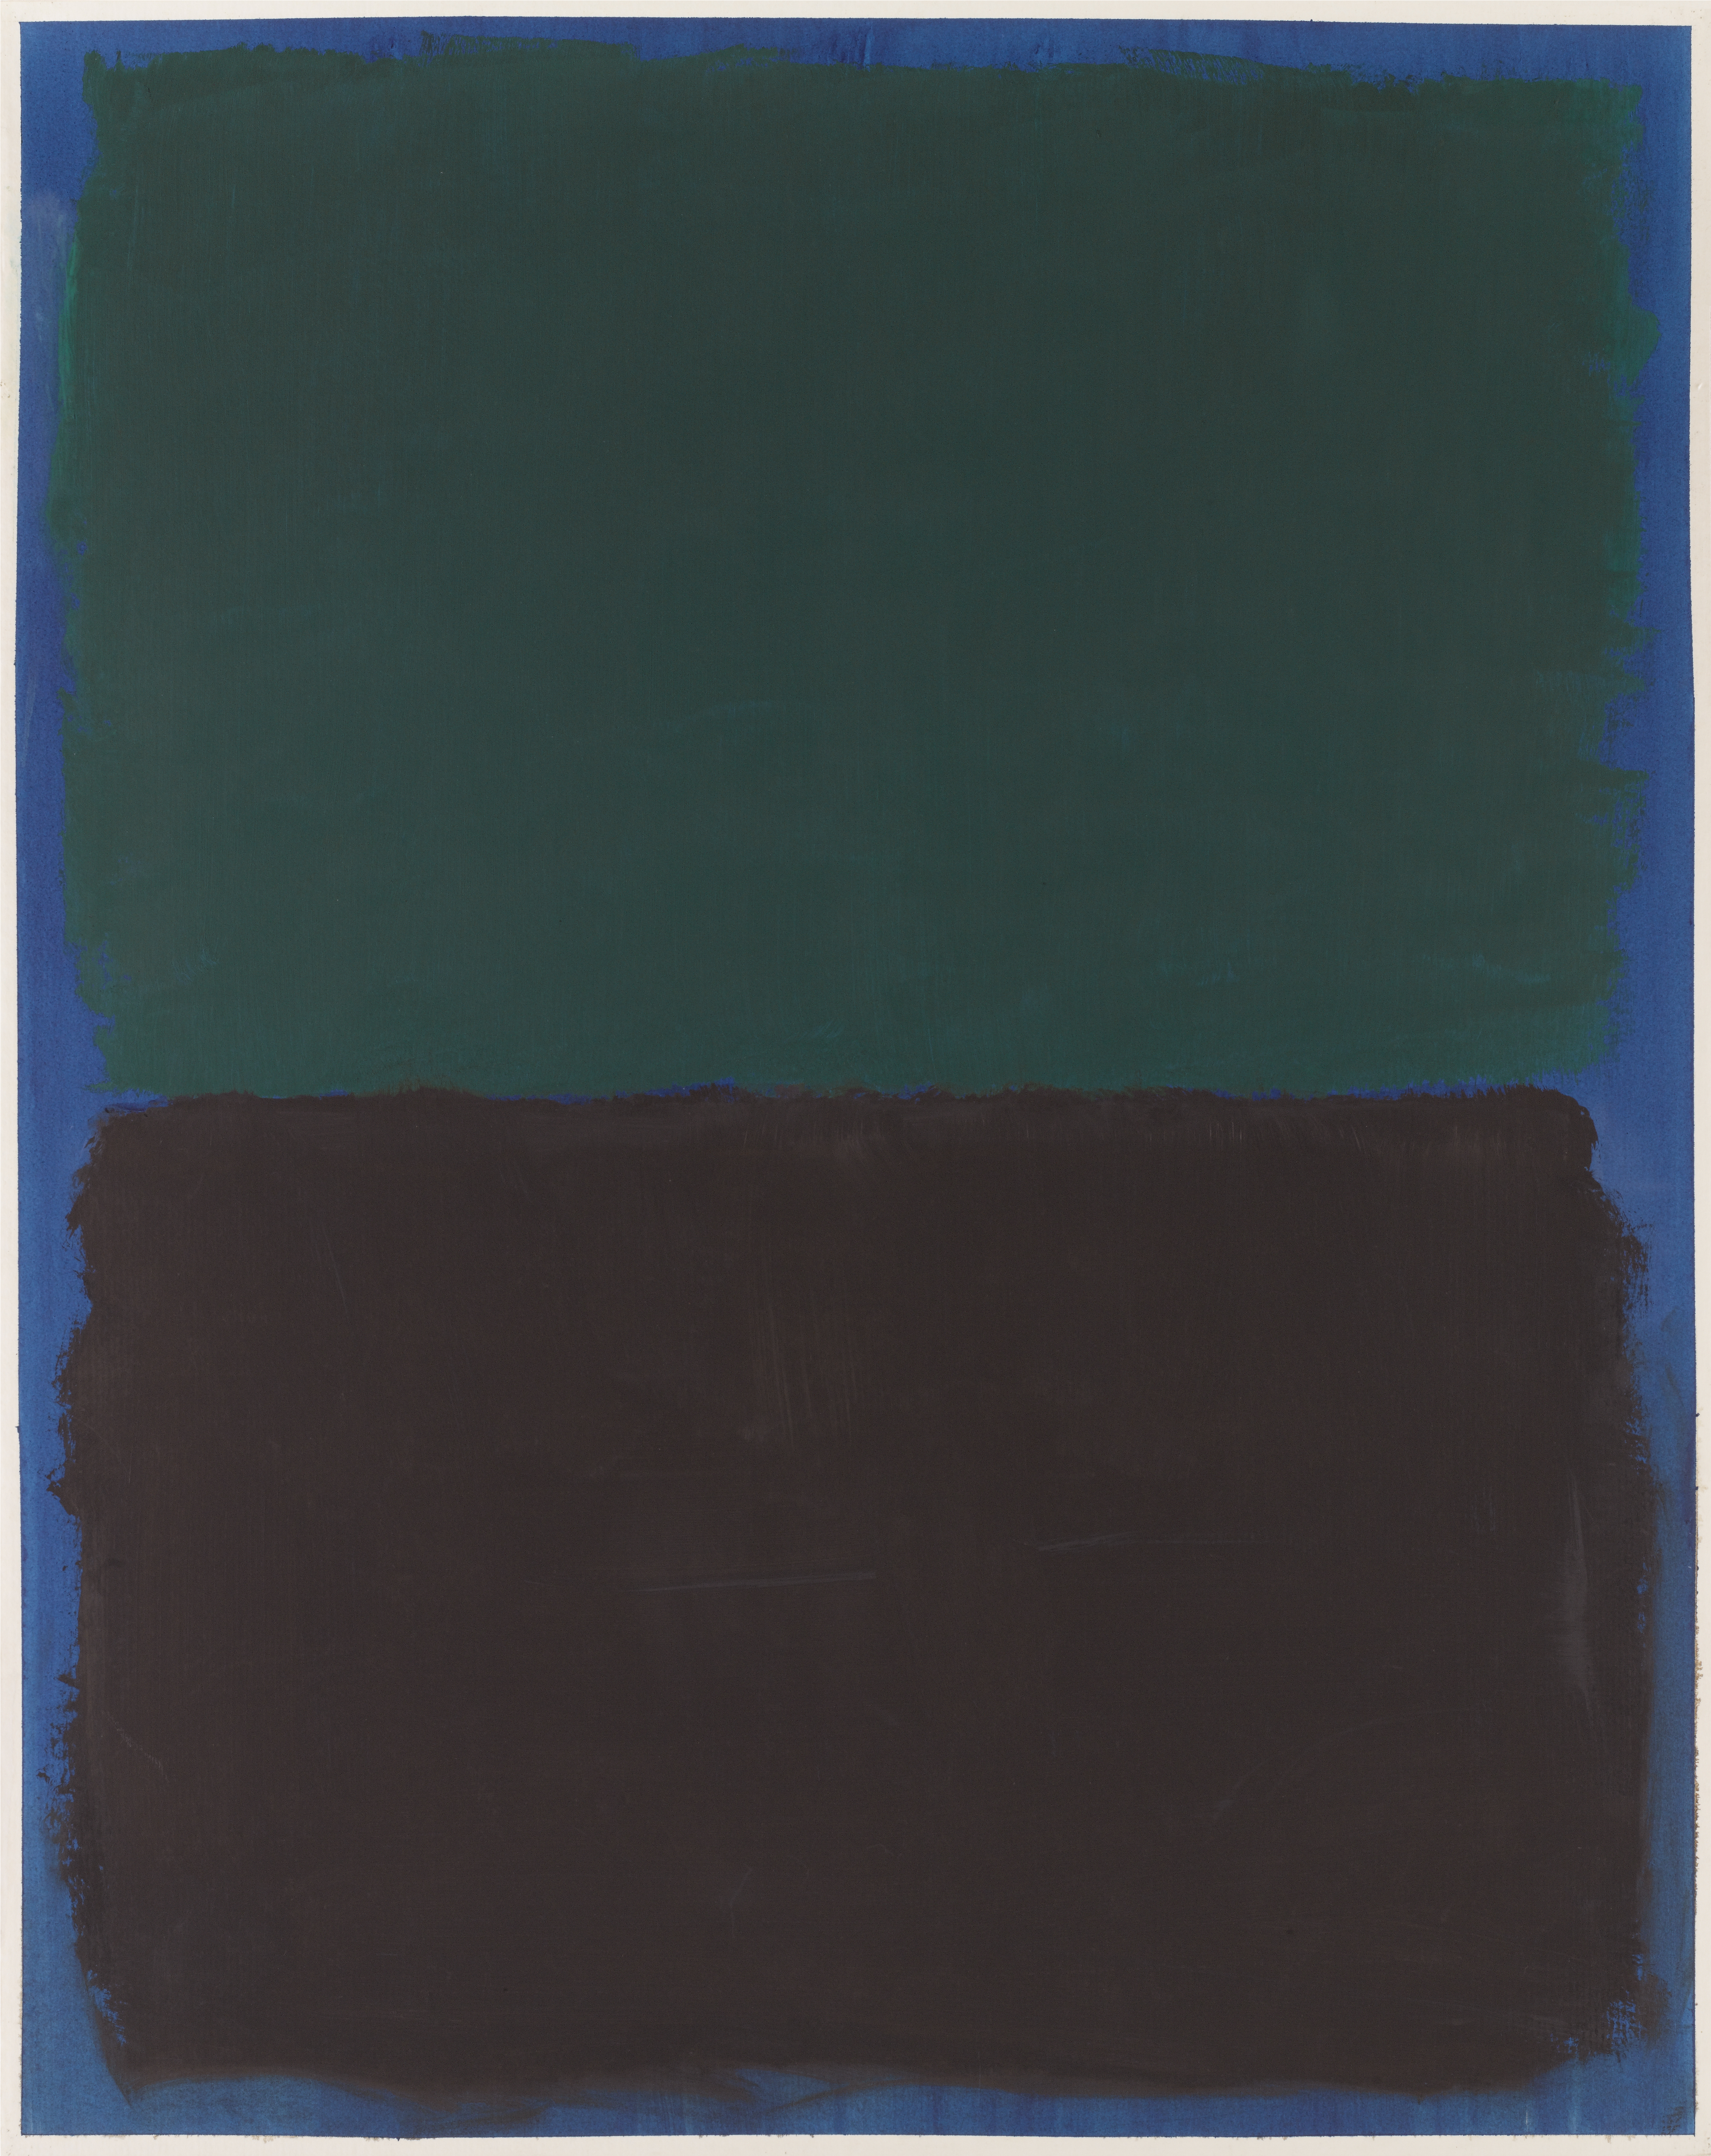 picture for Mark Rothko, Untitled, 1969, Acrylic on paper, 53⅝ x 42⅜ in, Rothko Estate #2032.69, Collection of Christopher Rothko, Copyright ©2021 by Kate Rothko Prizel and Christopher Rothko